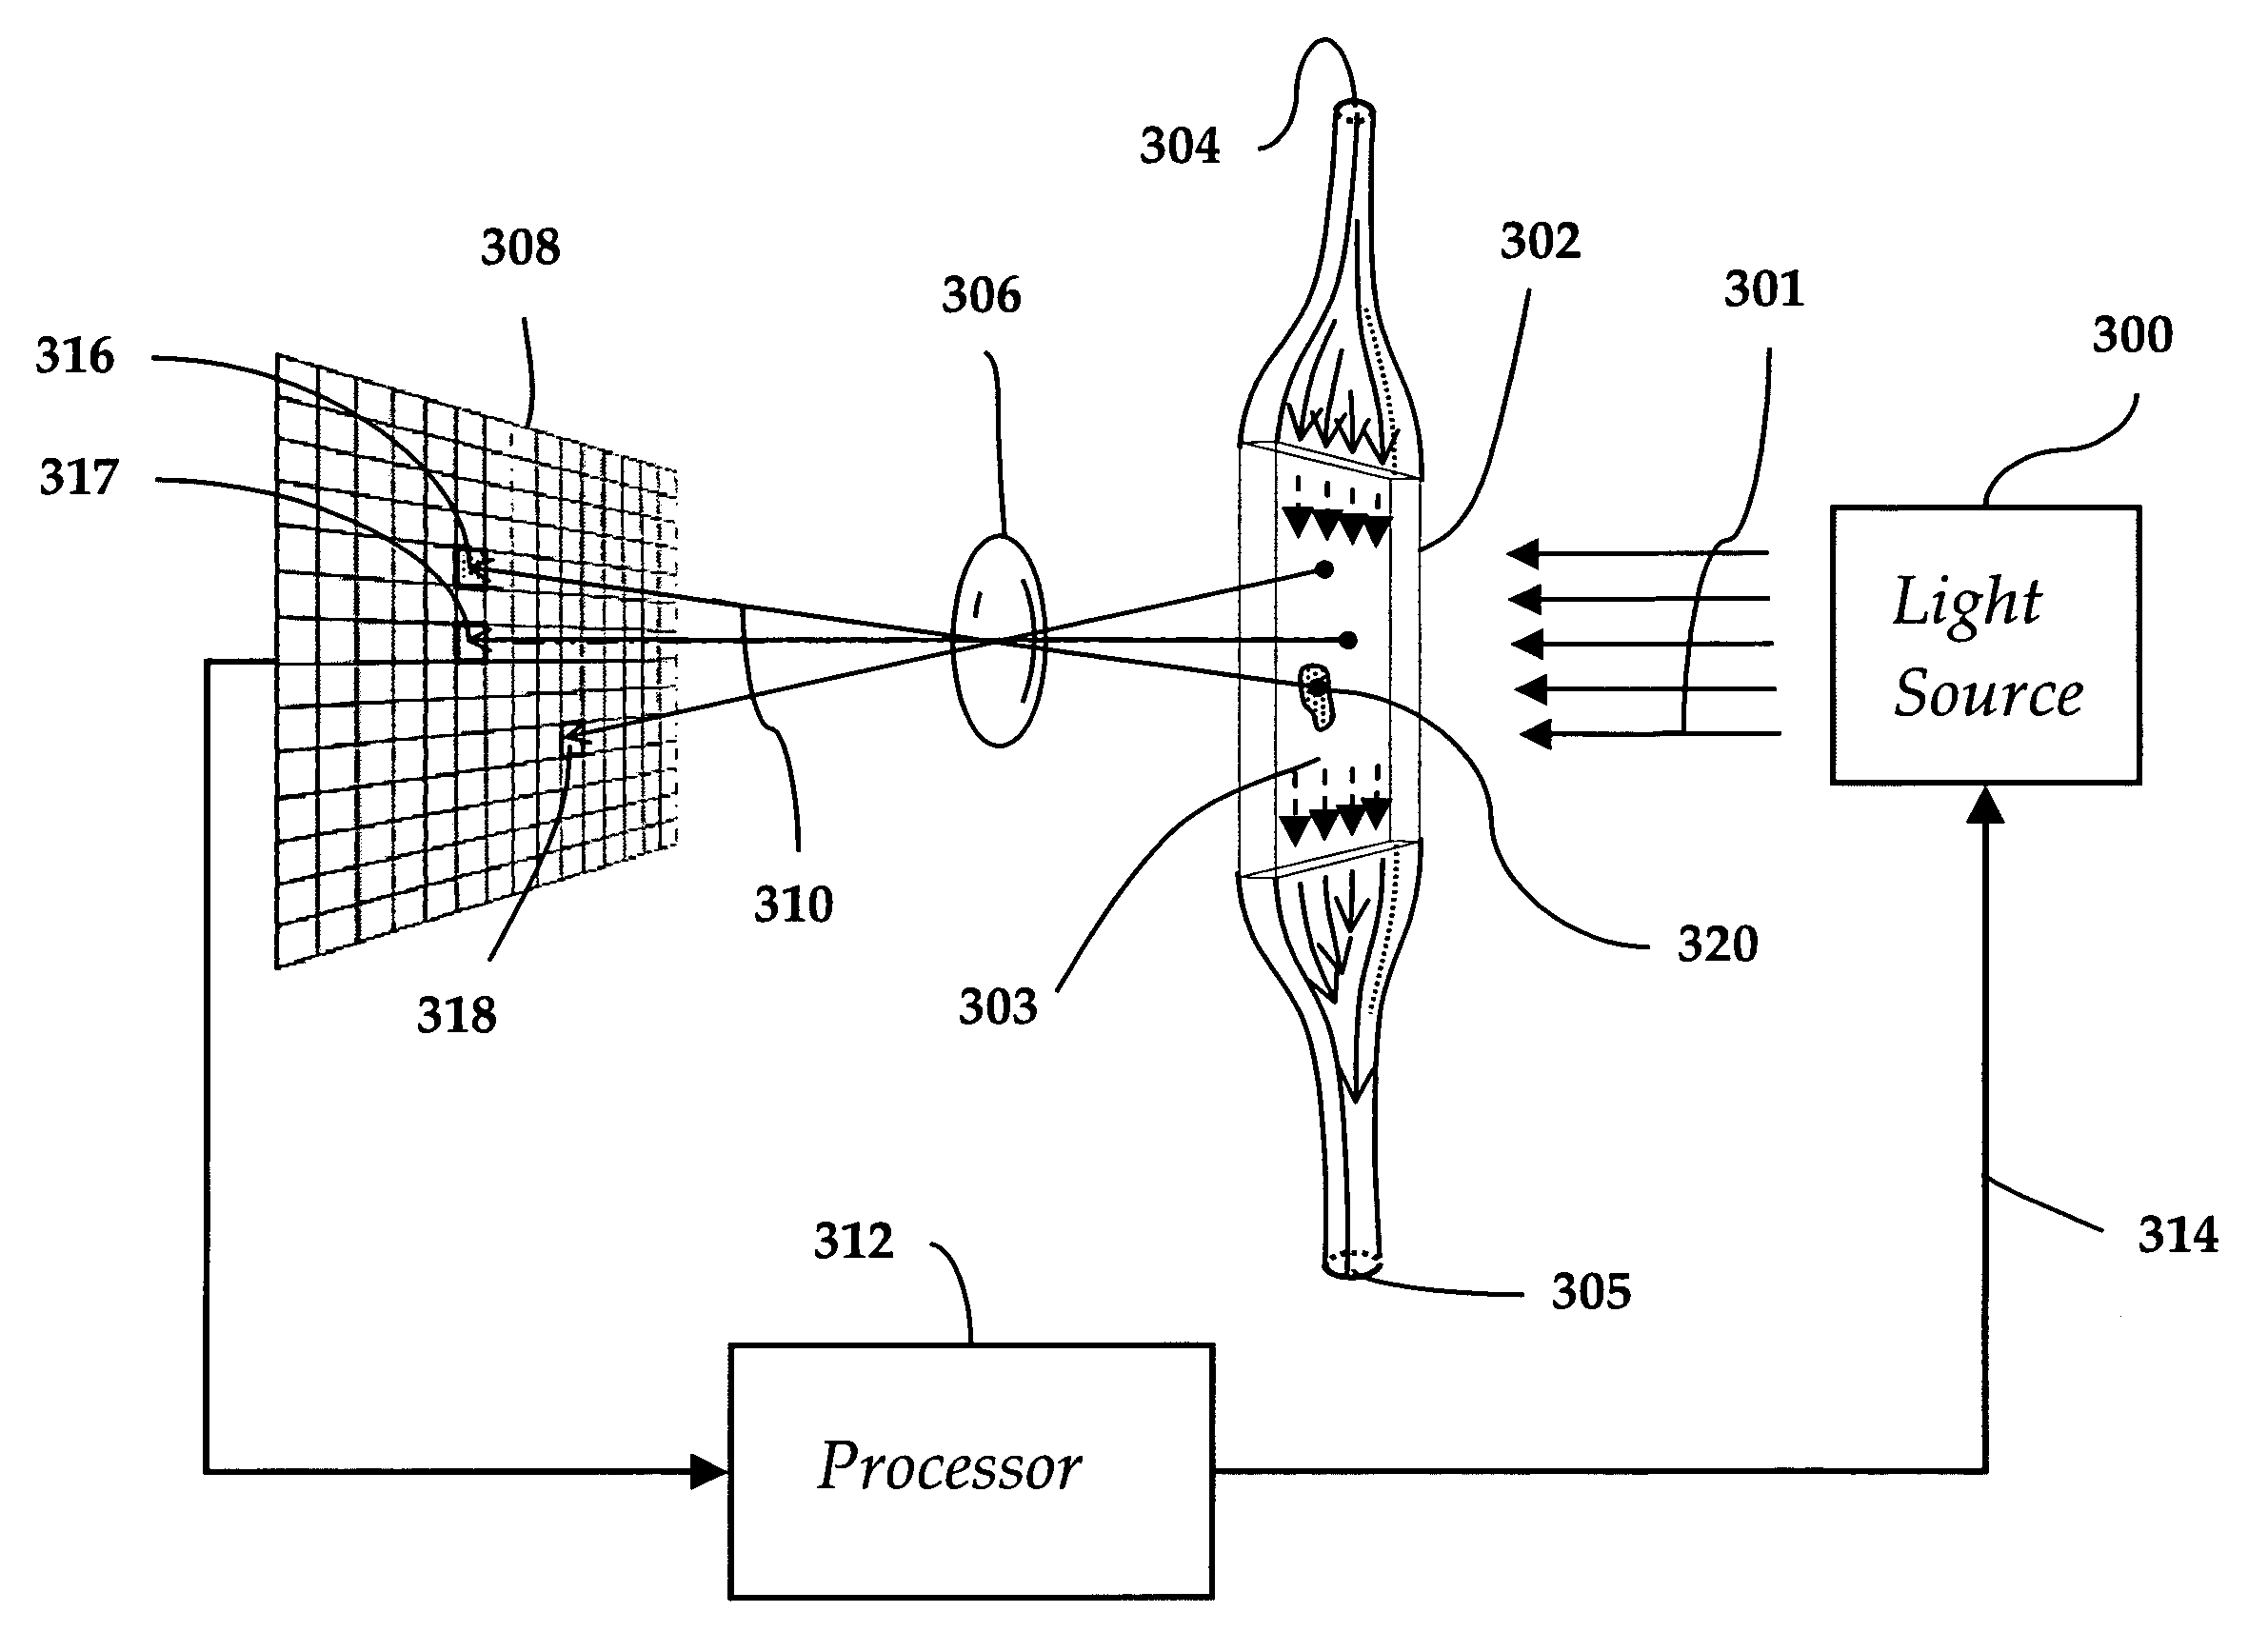 Method and Apparatus for Analyzing Particles in a Fluid